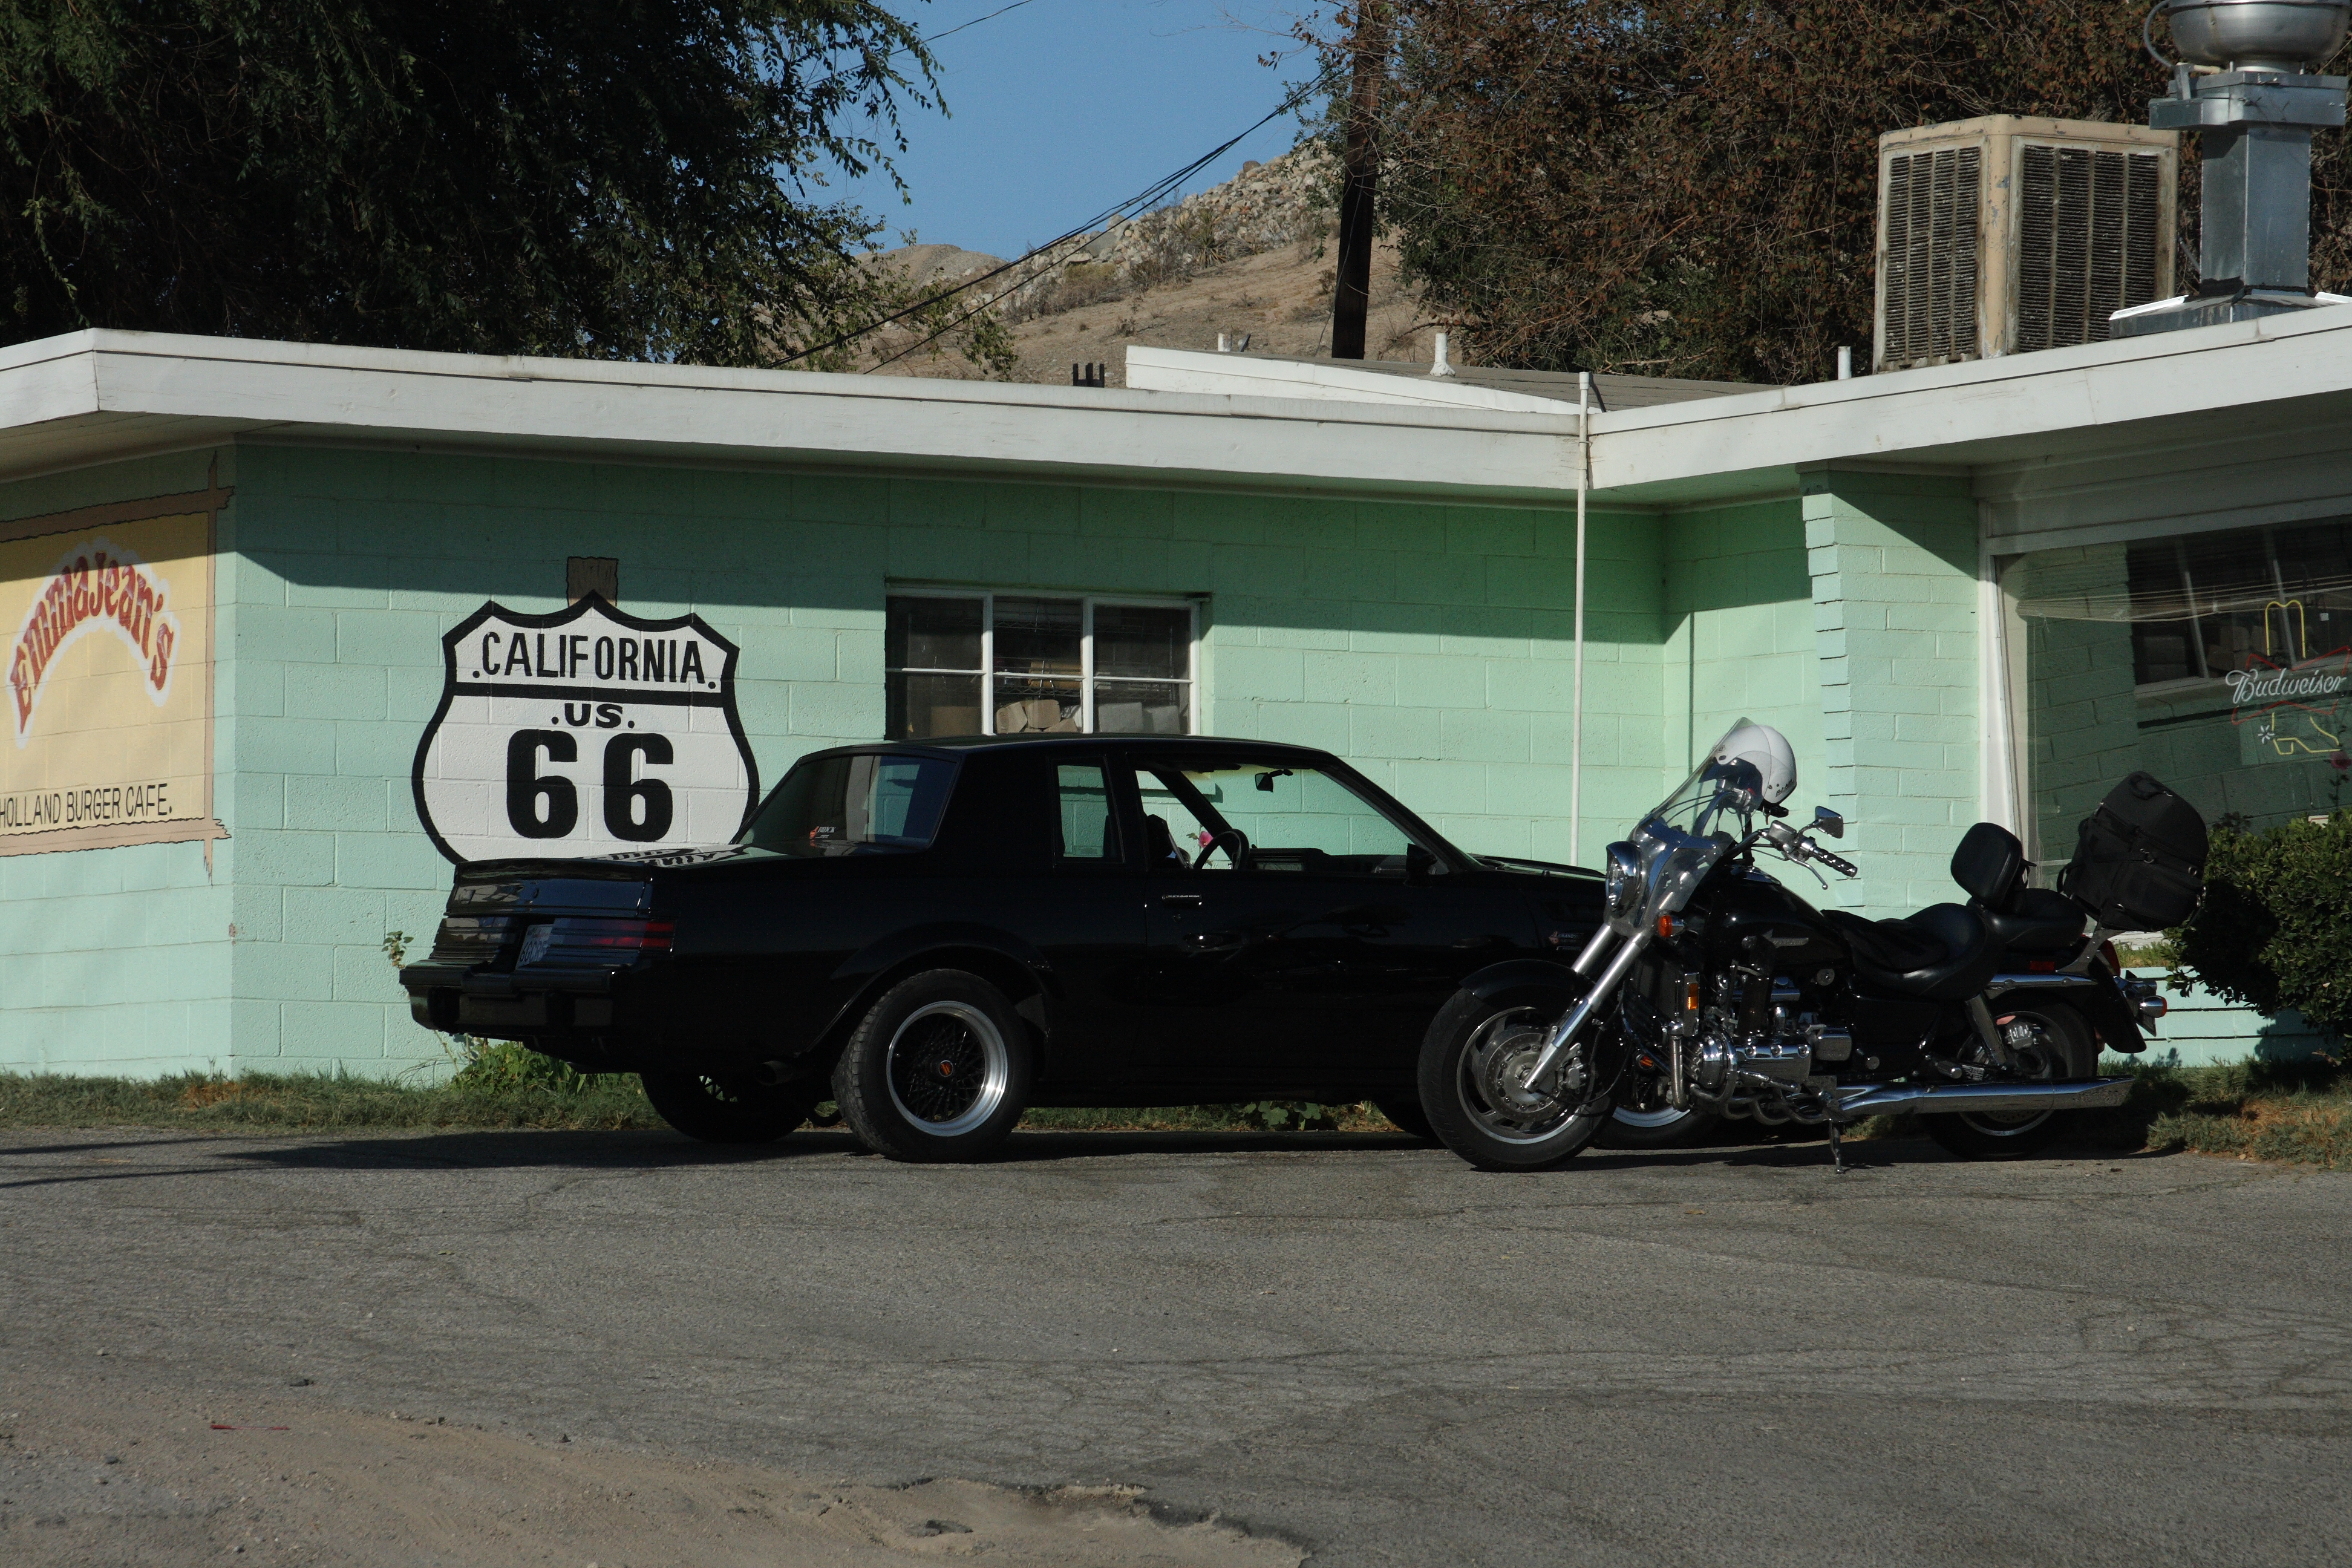 Holland Burger - Route 66, Victorville, CA.jpg - Wikimedia Commons